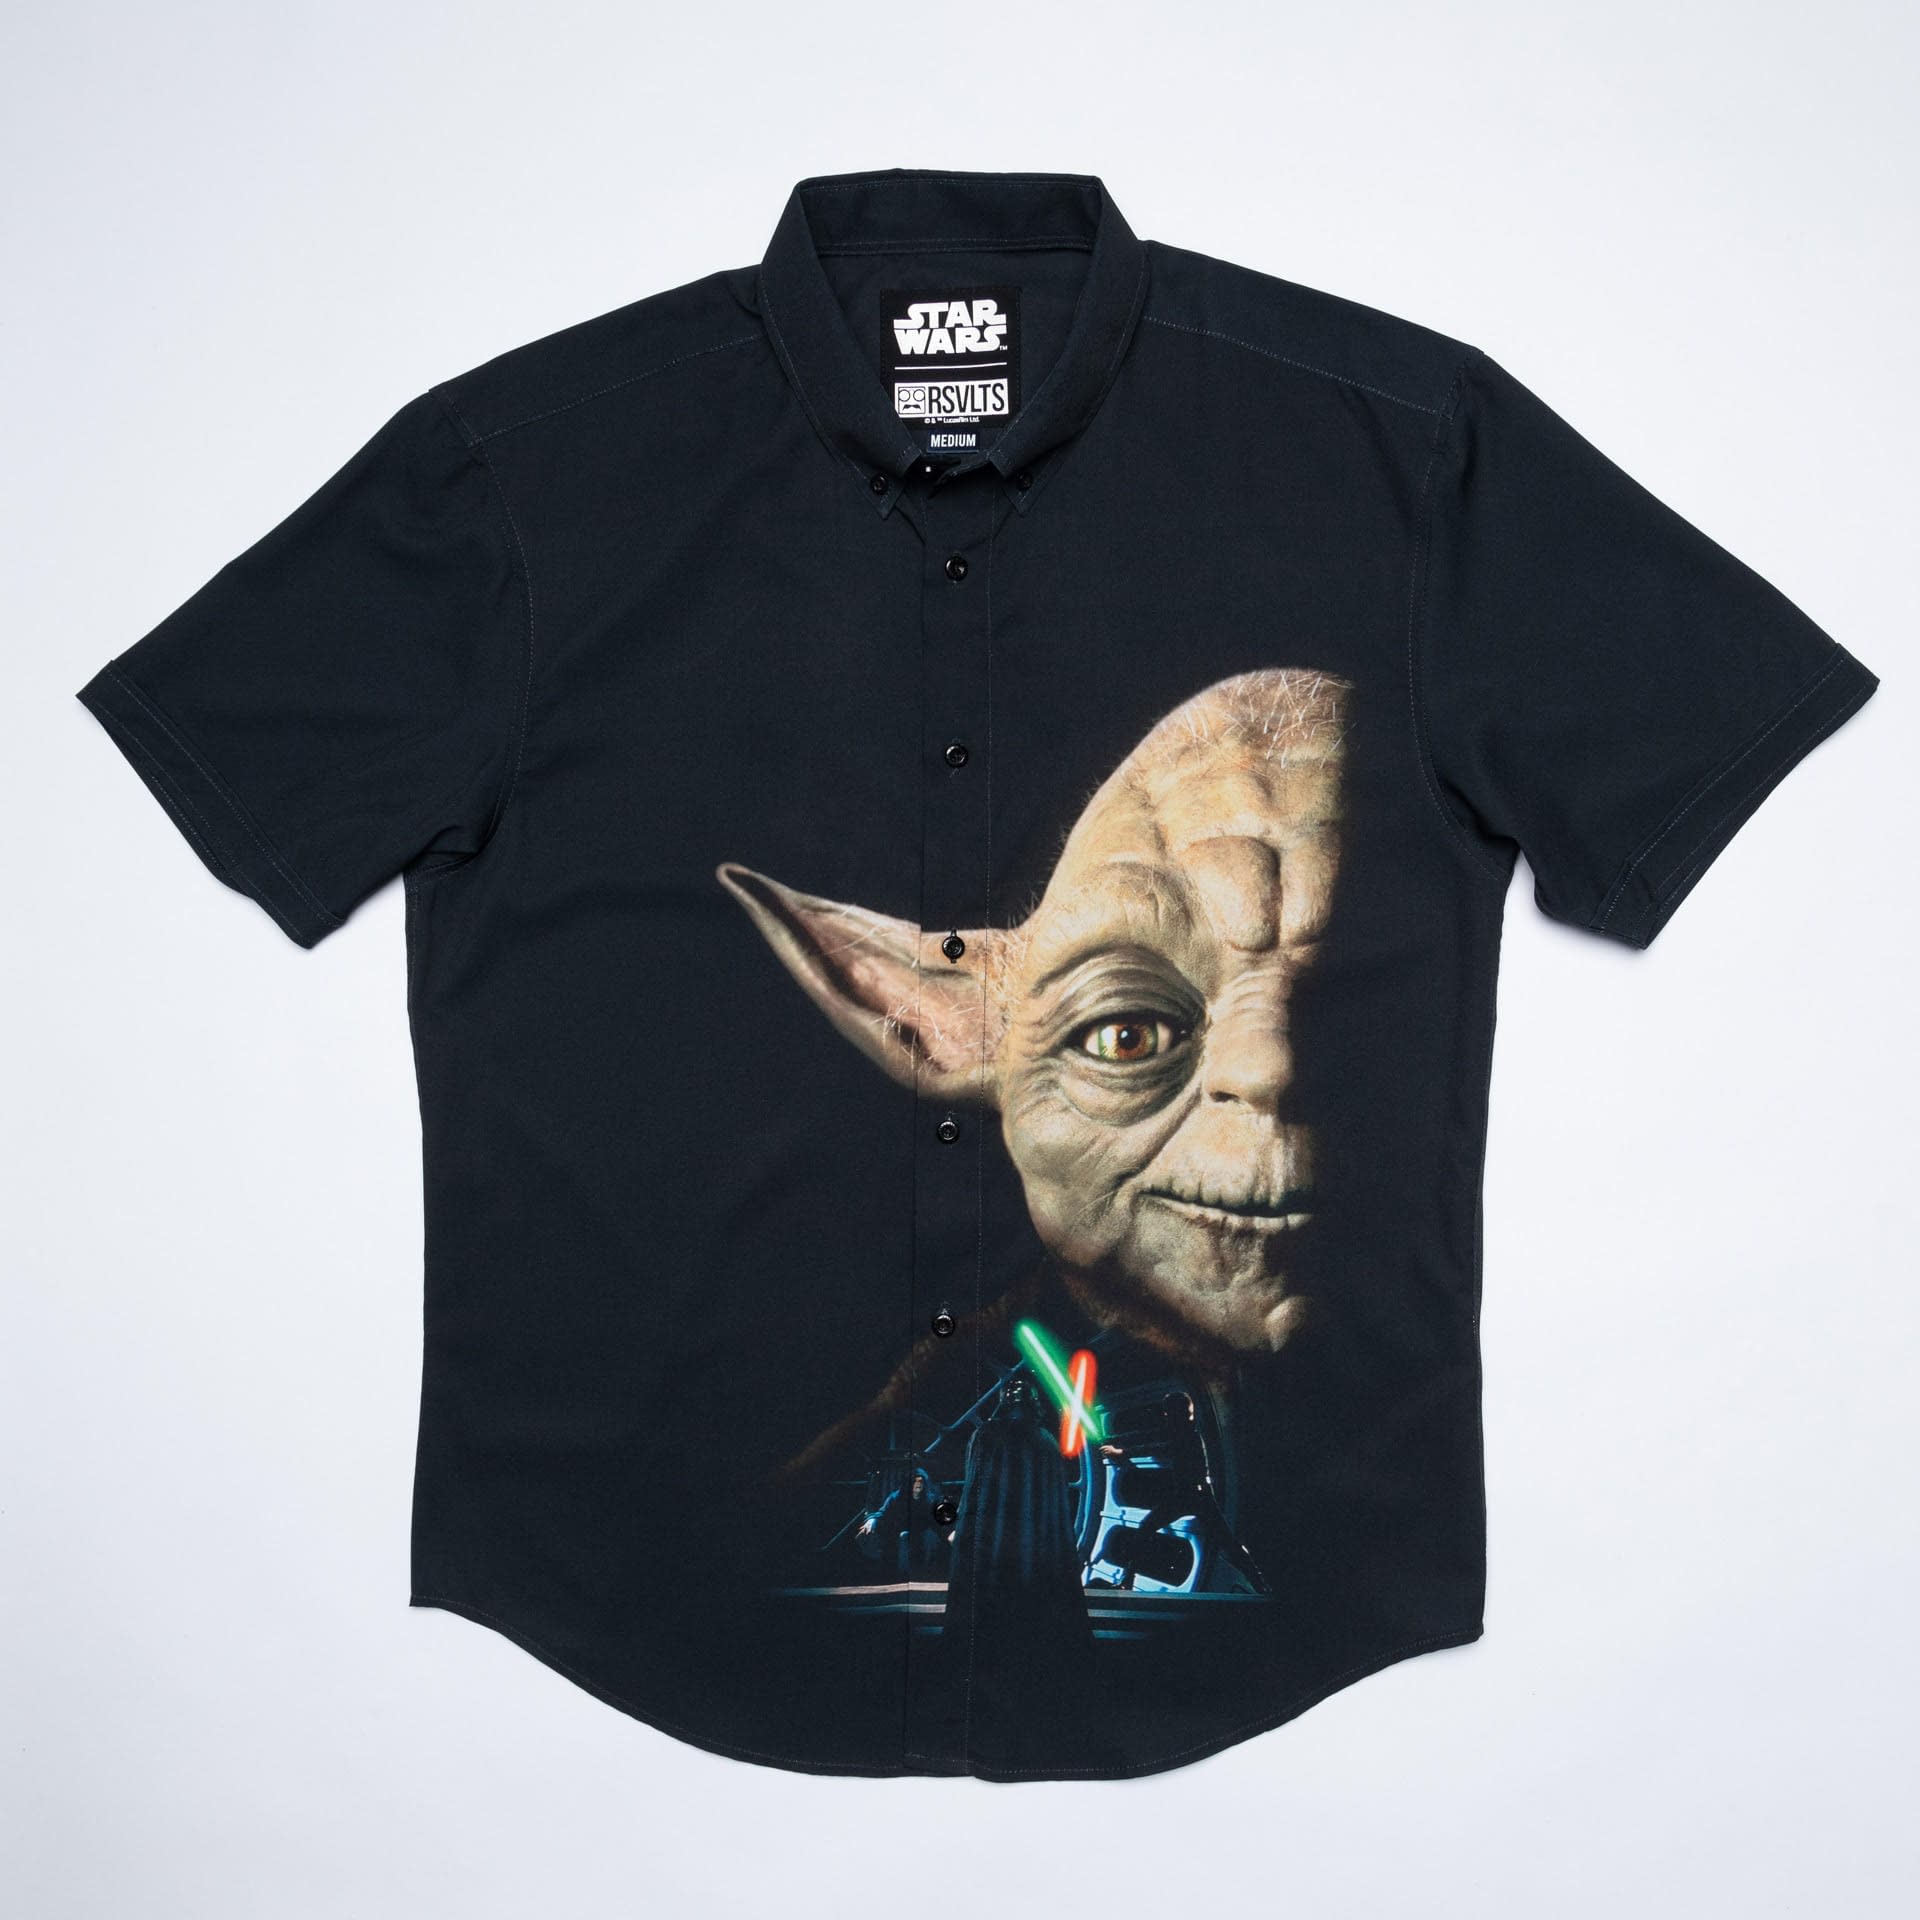 Celebrate I Am Your Father's Day with RSVLTS New Star Wars Collection